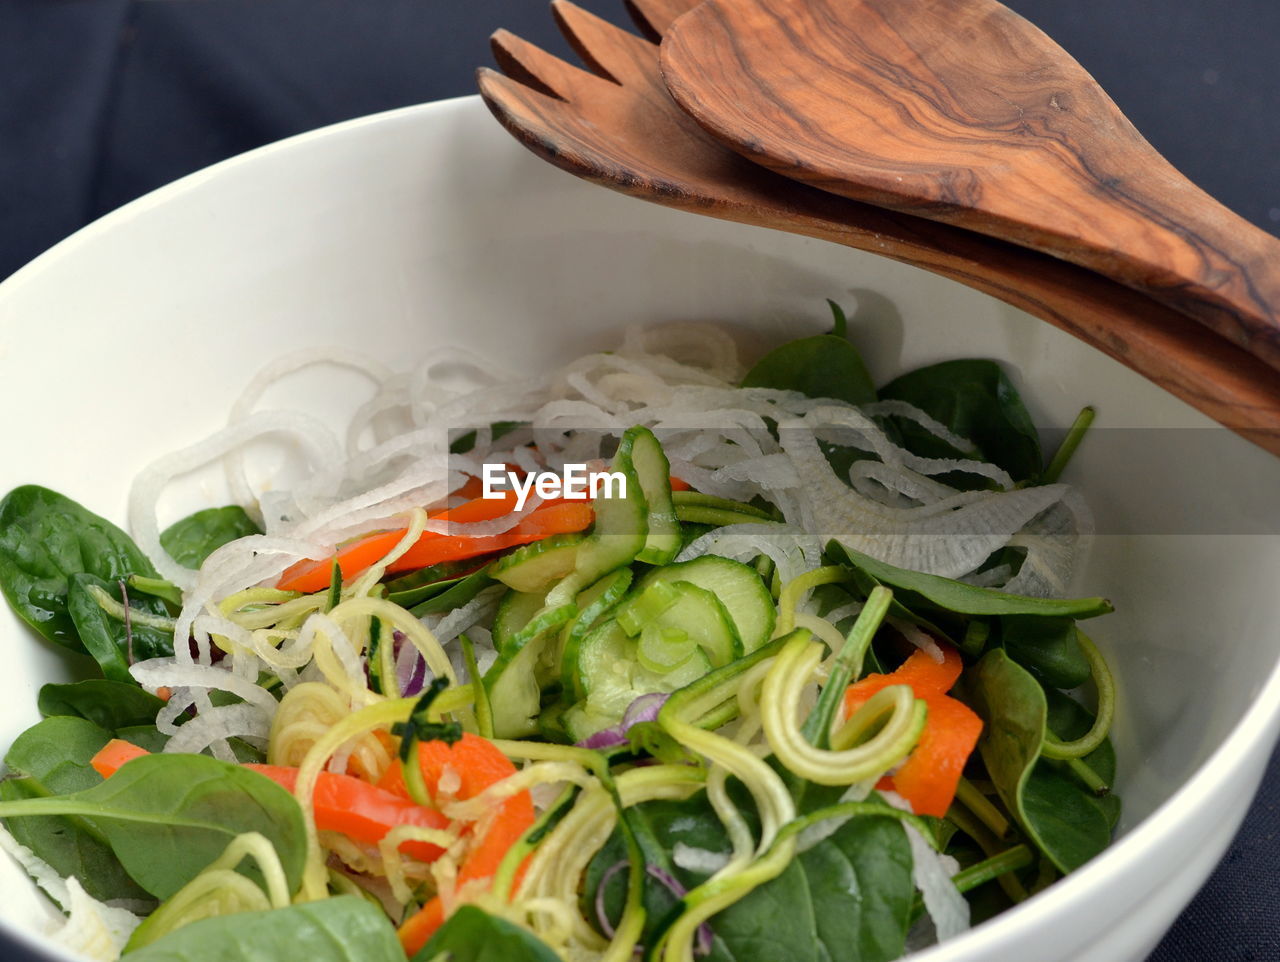 CLOSE-UP OF CHOPPED VEGETABLES IN BOWL